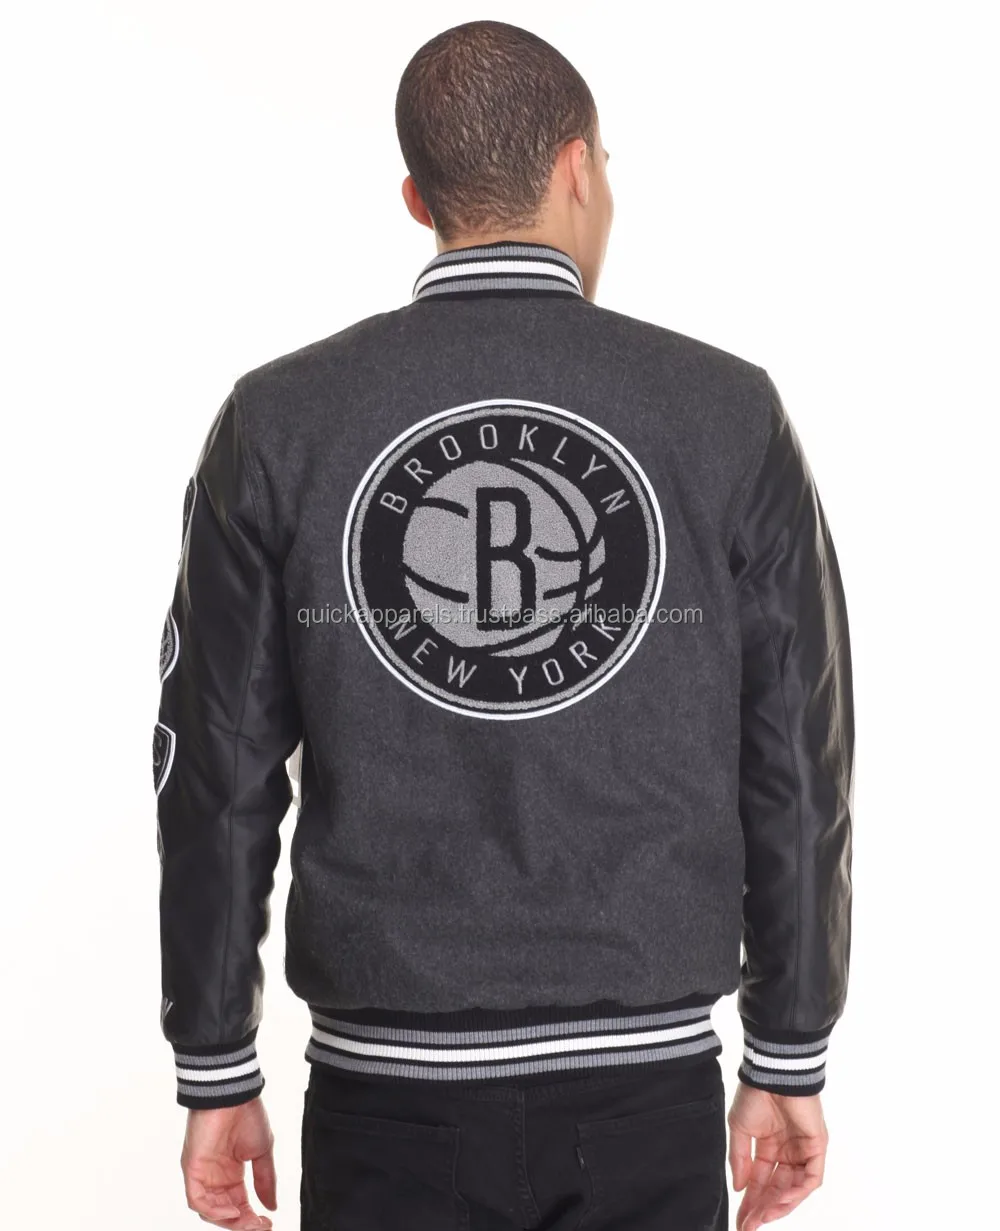 Custom Varsity Jackets With Logo & Chenille Patch,Make Your Own Design